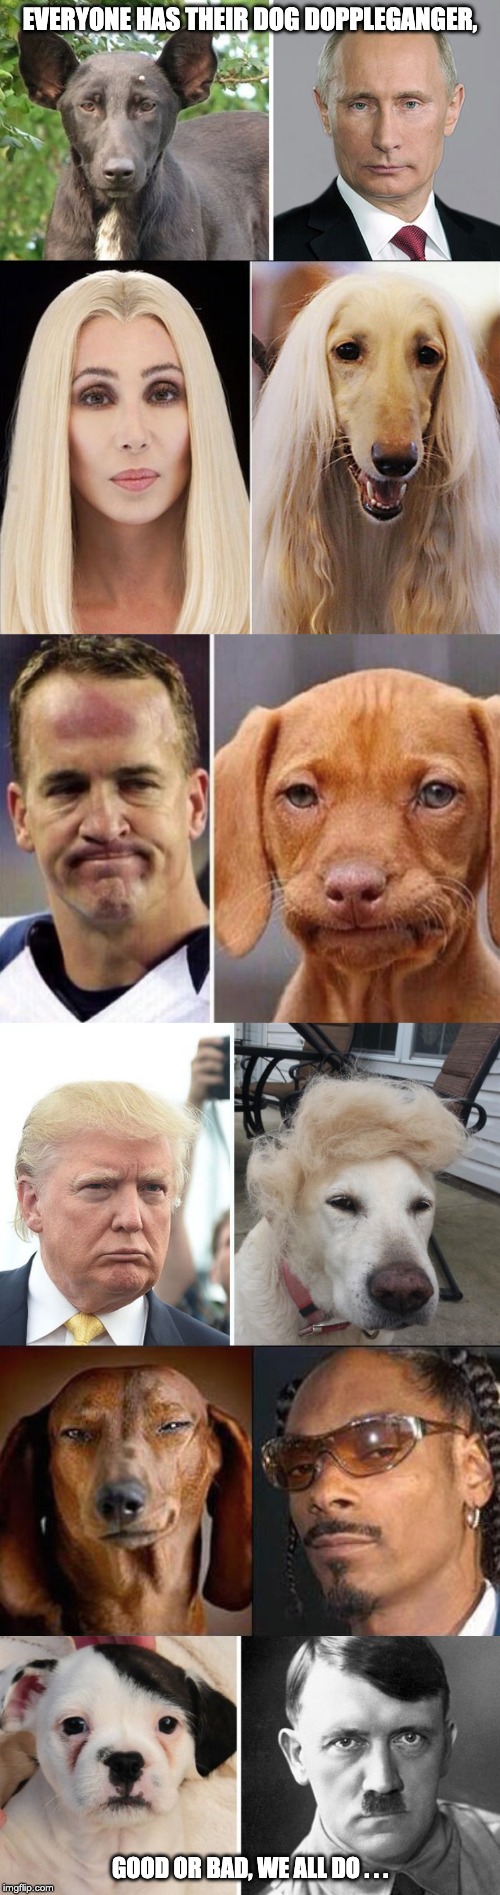 DOGpplegangers | EVERYONE HAS THEIR DOG DOPPLEGANGER, GOOD OR BAD, WE ALL DO . . . | image tagged in dogs,snoop dogg,vladimir putin,donald trump,disappointed dog,adolf | made w/ Imgflip meme maker